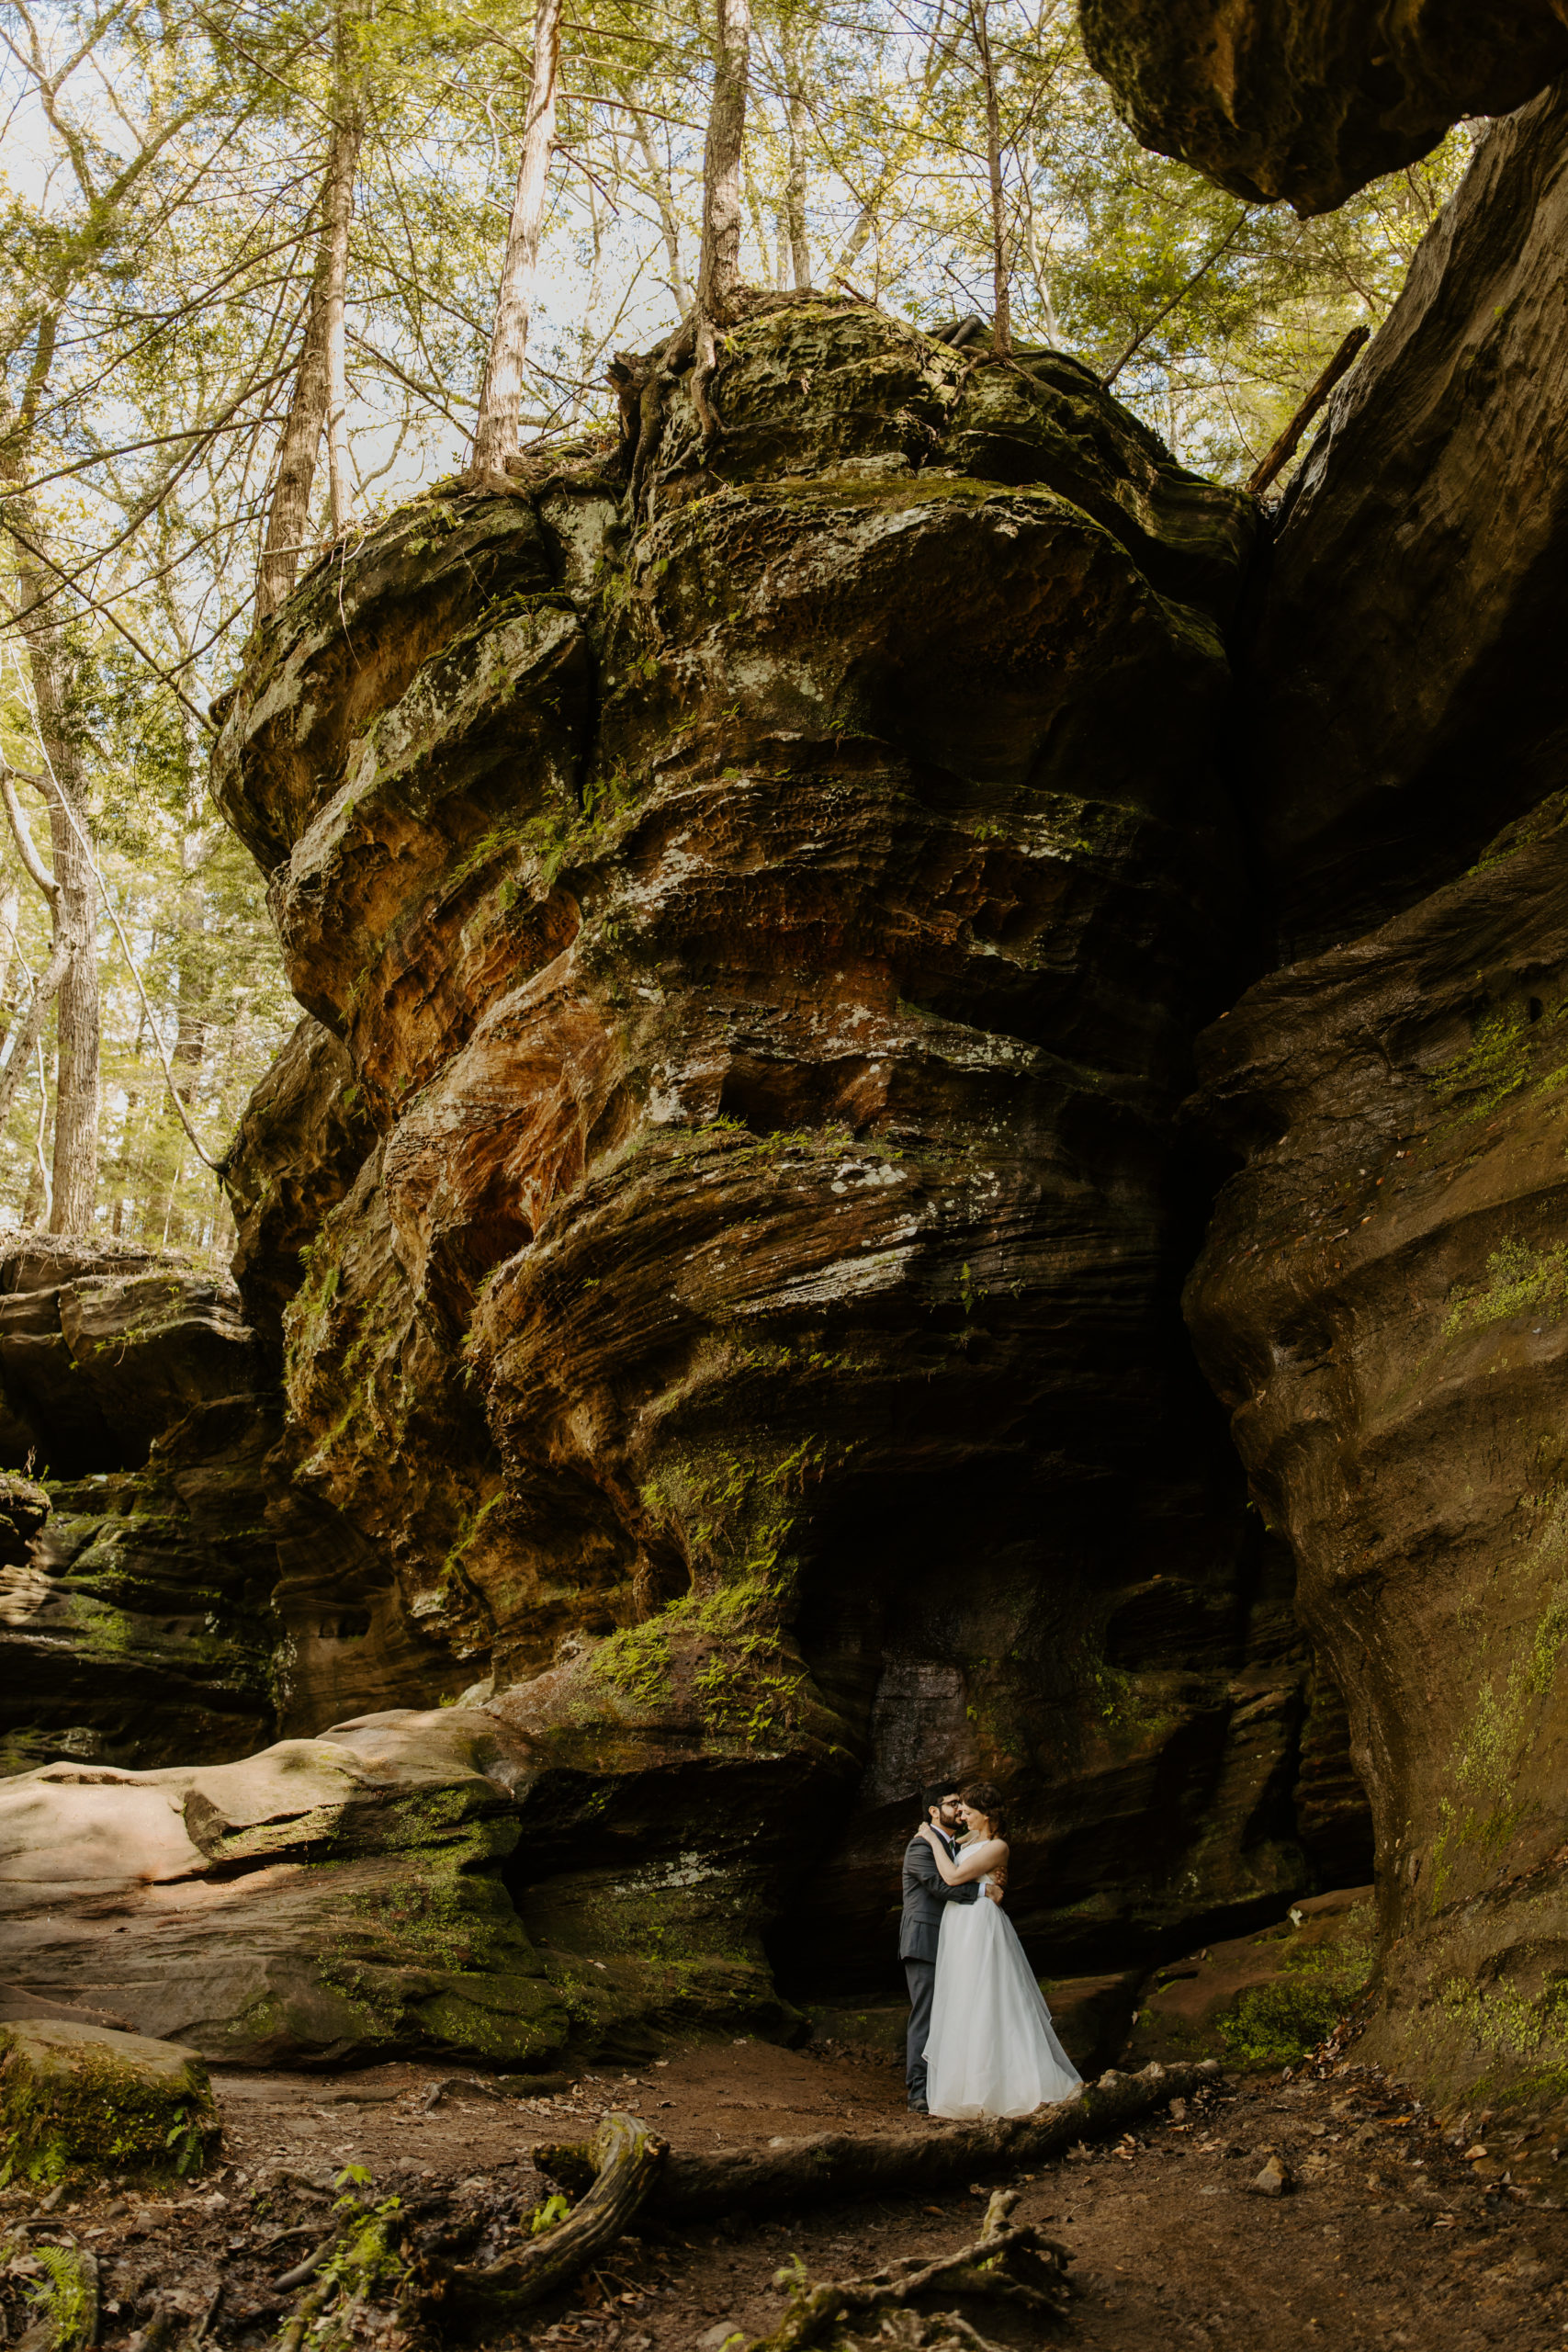 Eloping couple at Hocking Hills standing under rock towers